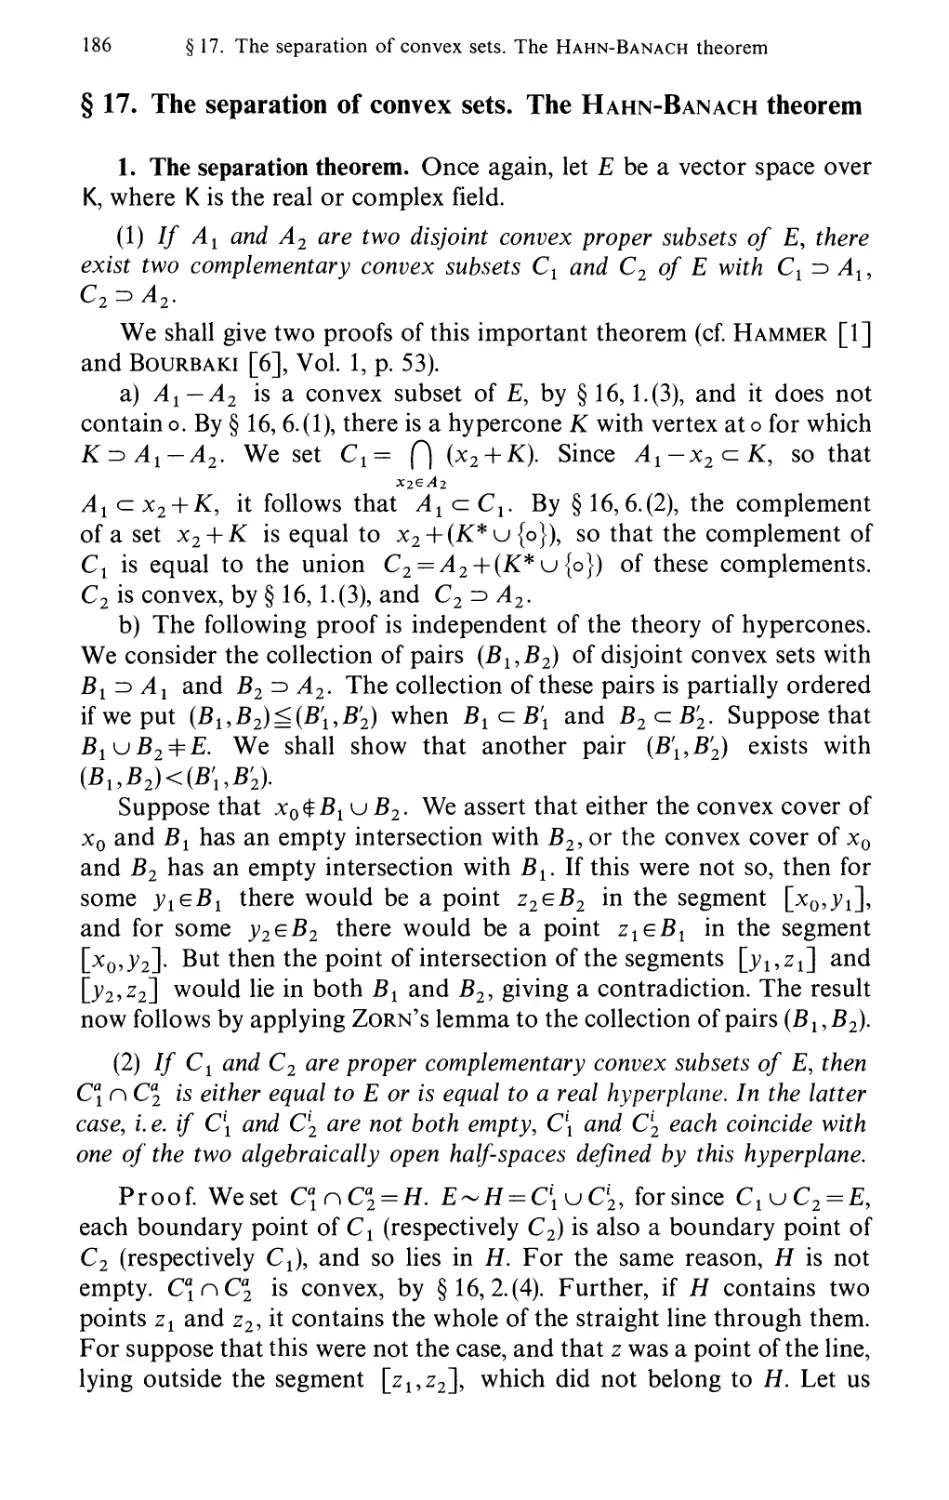 §17. The separation of convex sets. The Hahn-Banach theorem